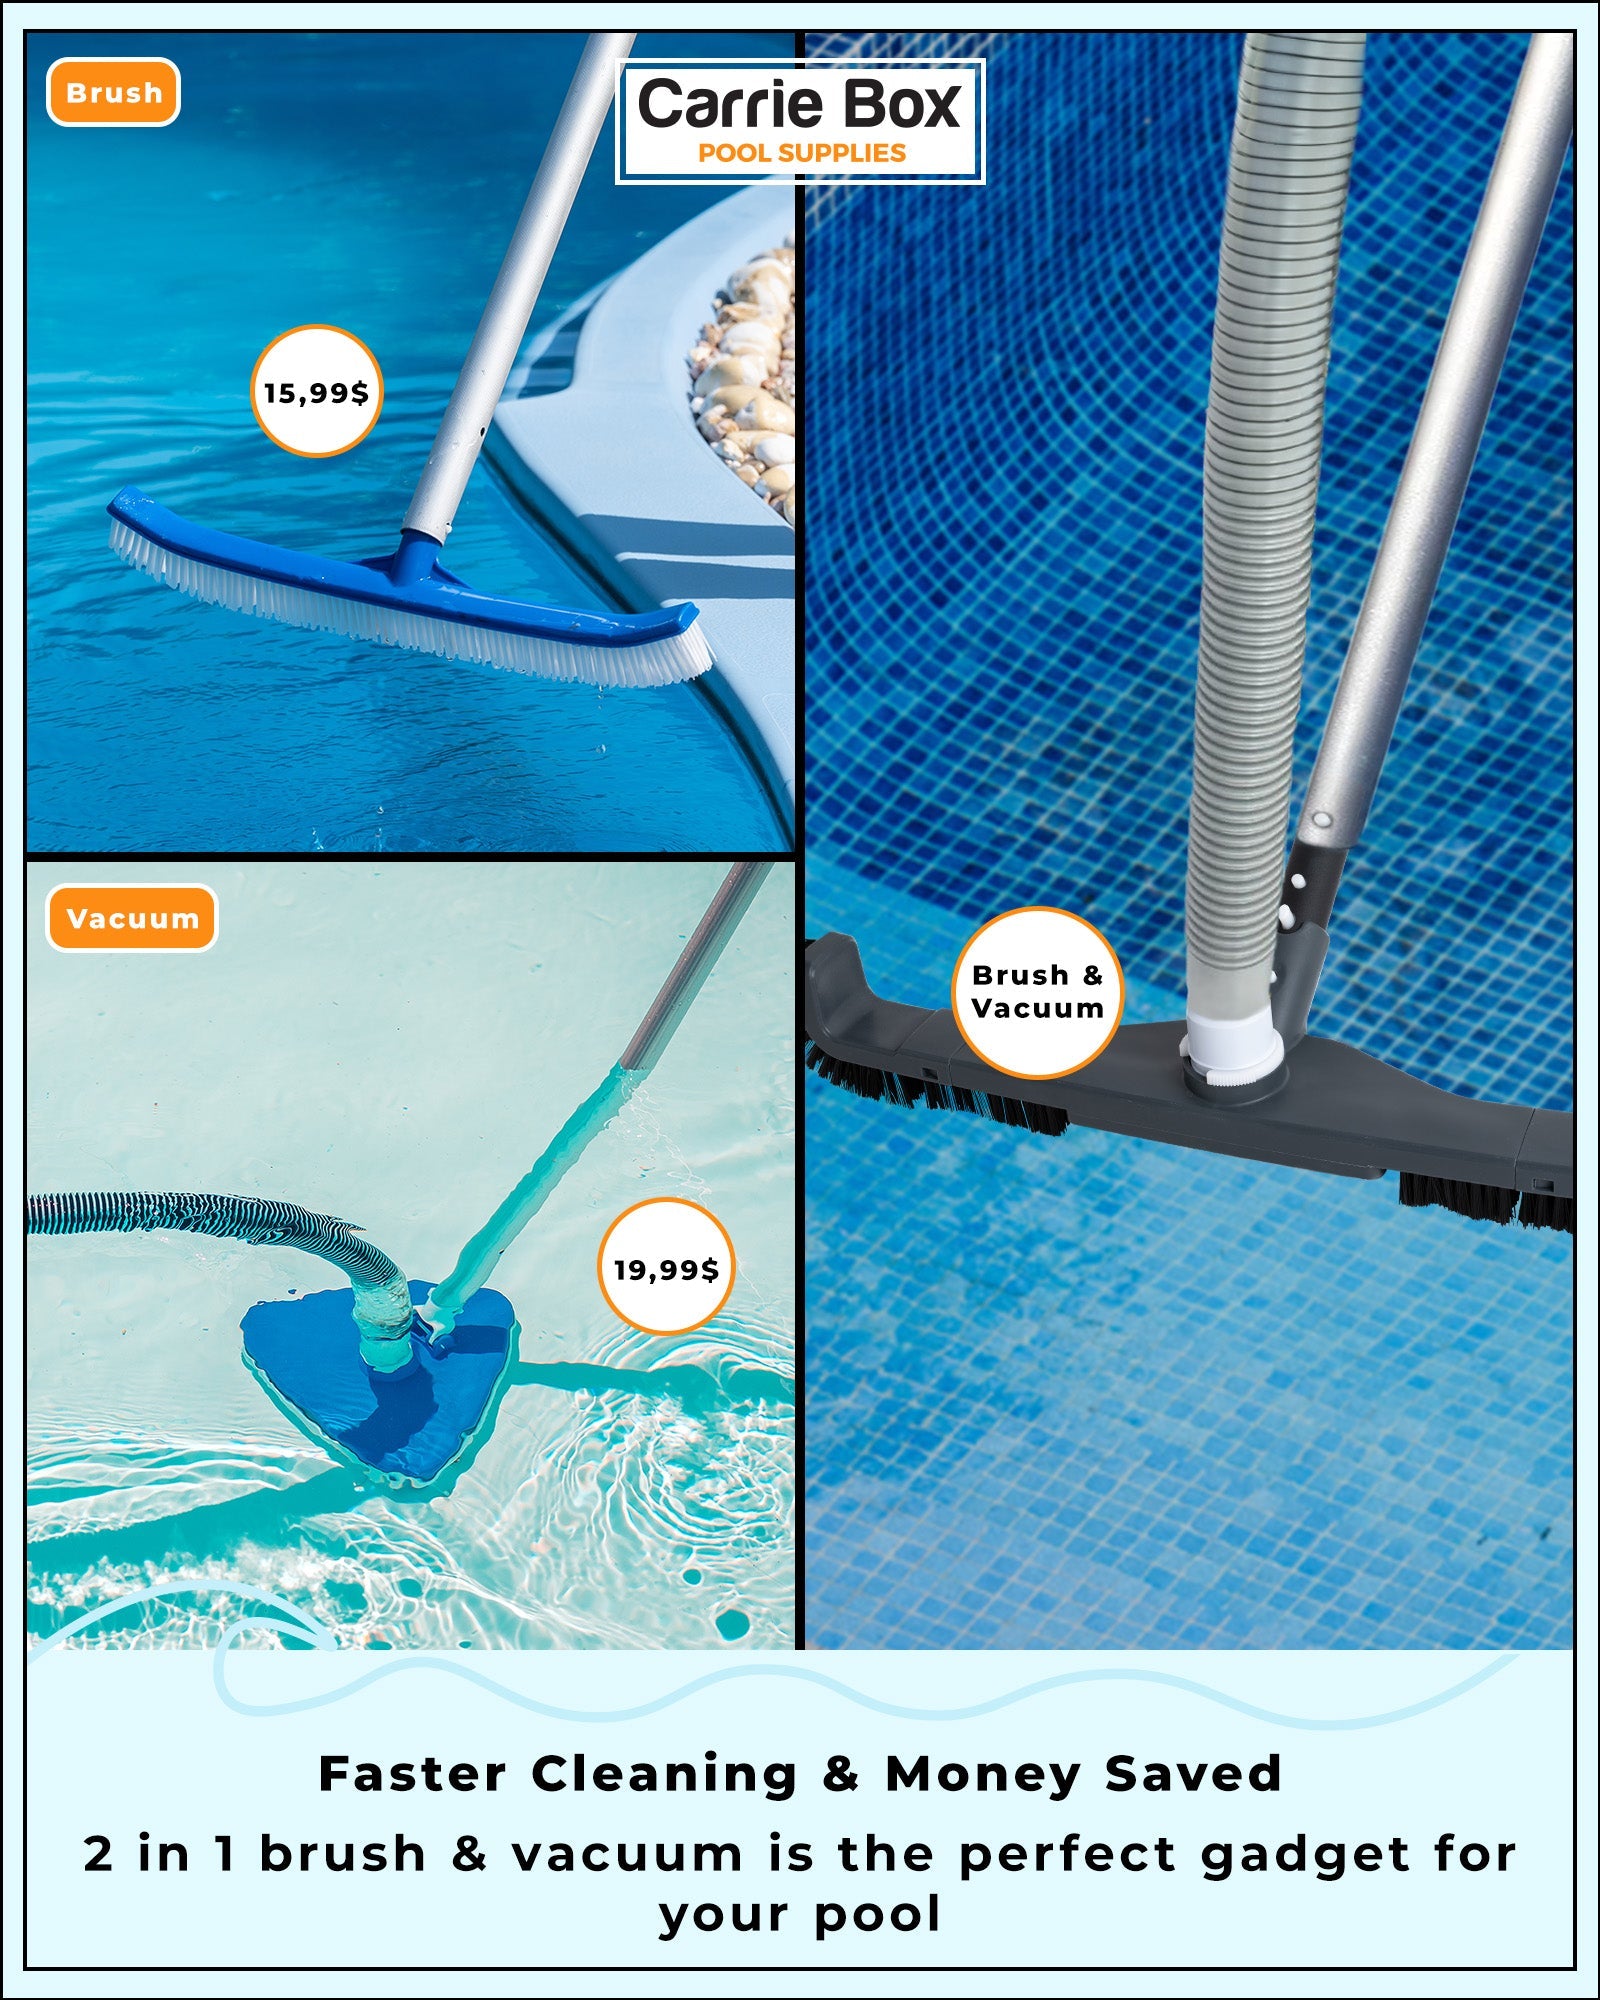 Carrie Box XL 20-Inch 2 in 1 Curved Pool Brush with Vacuum Head EU